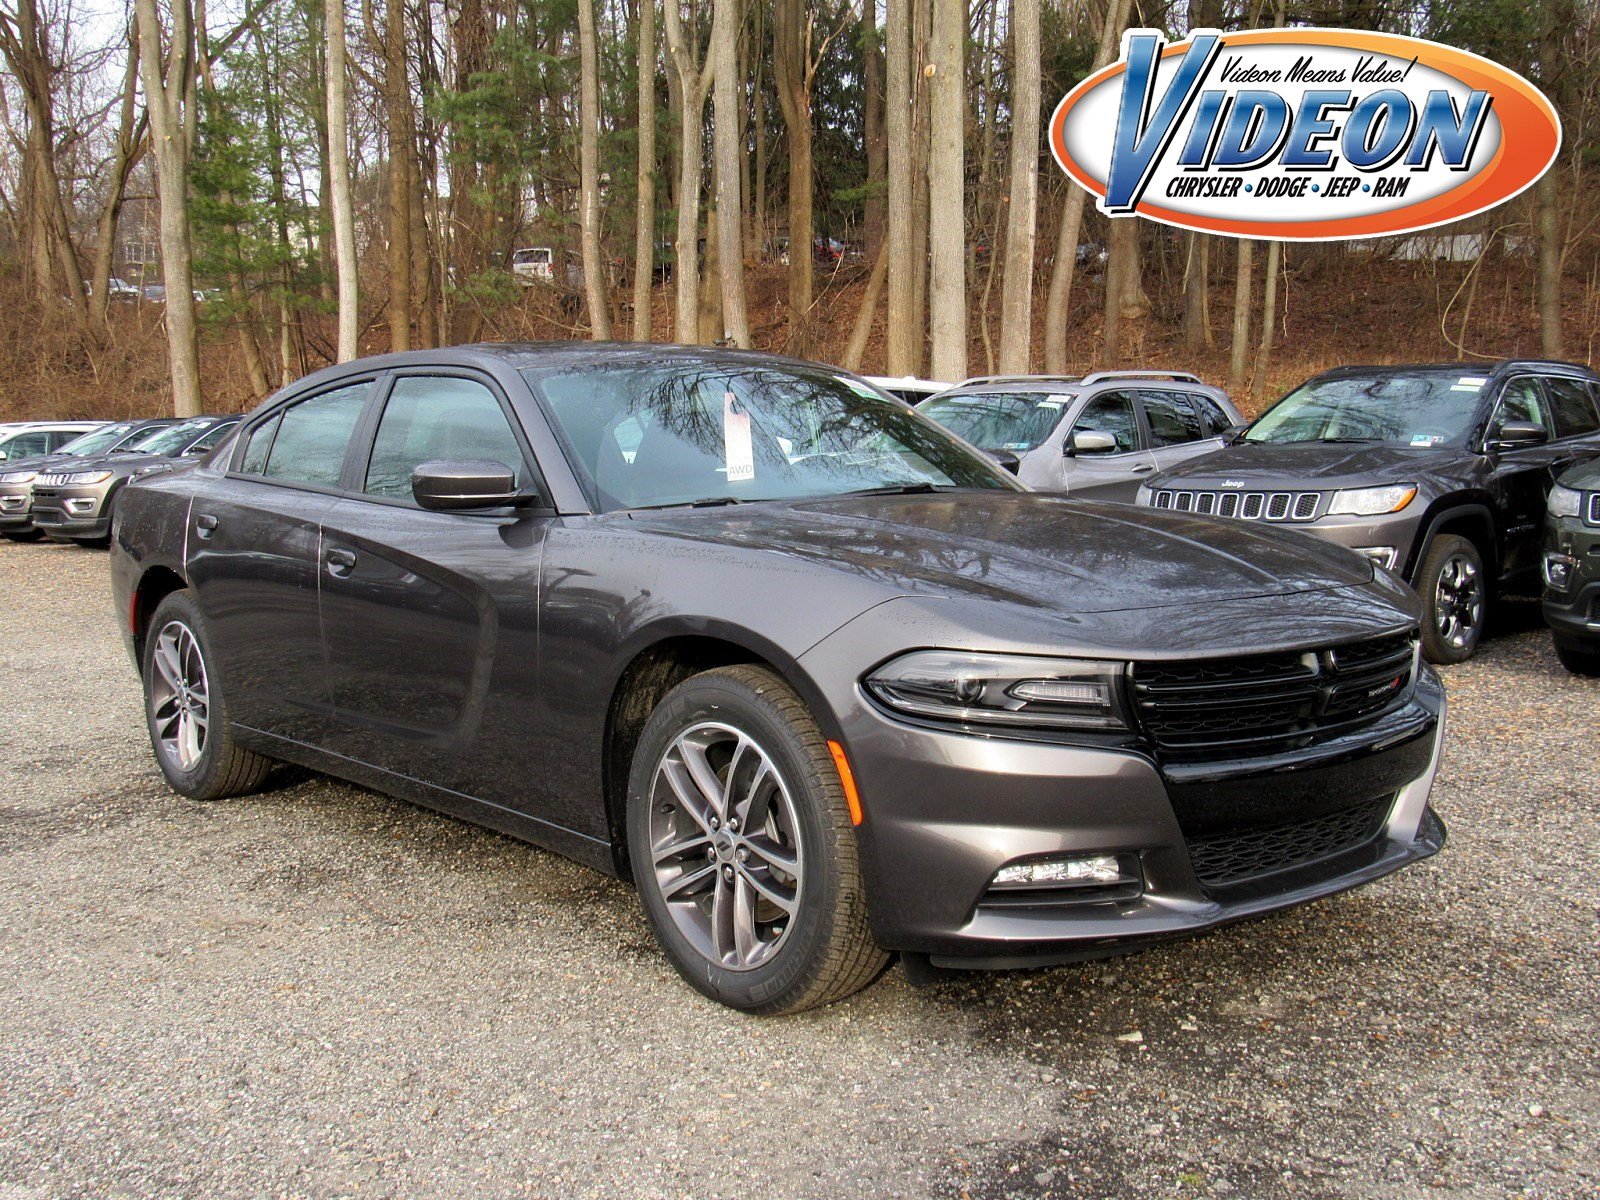 New 2019 DODGE Charger SXT Sedan in Newtown Square K2025.